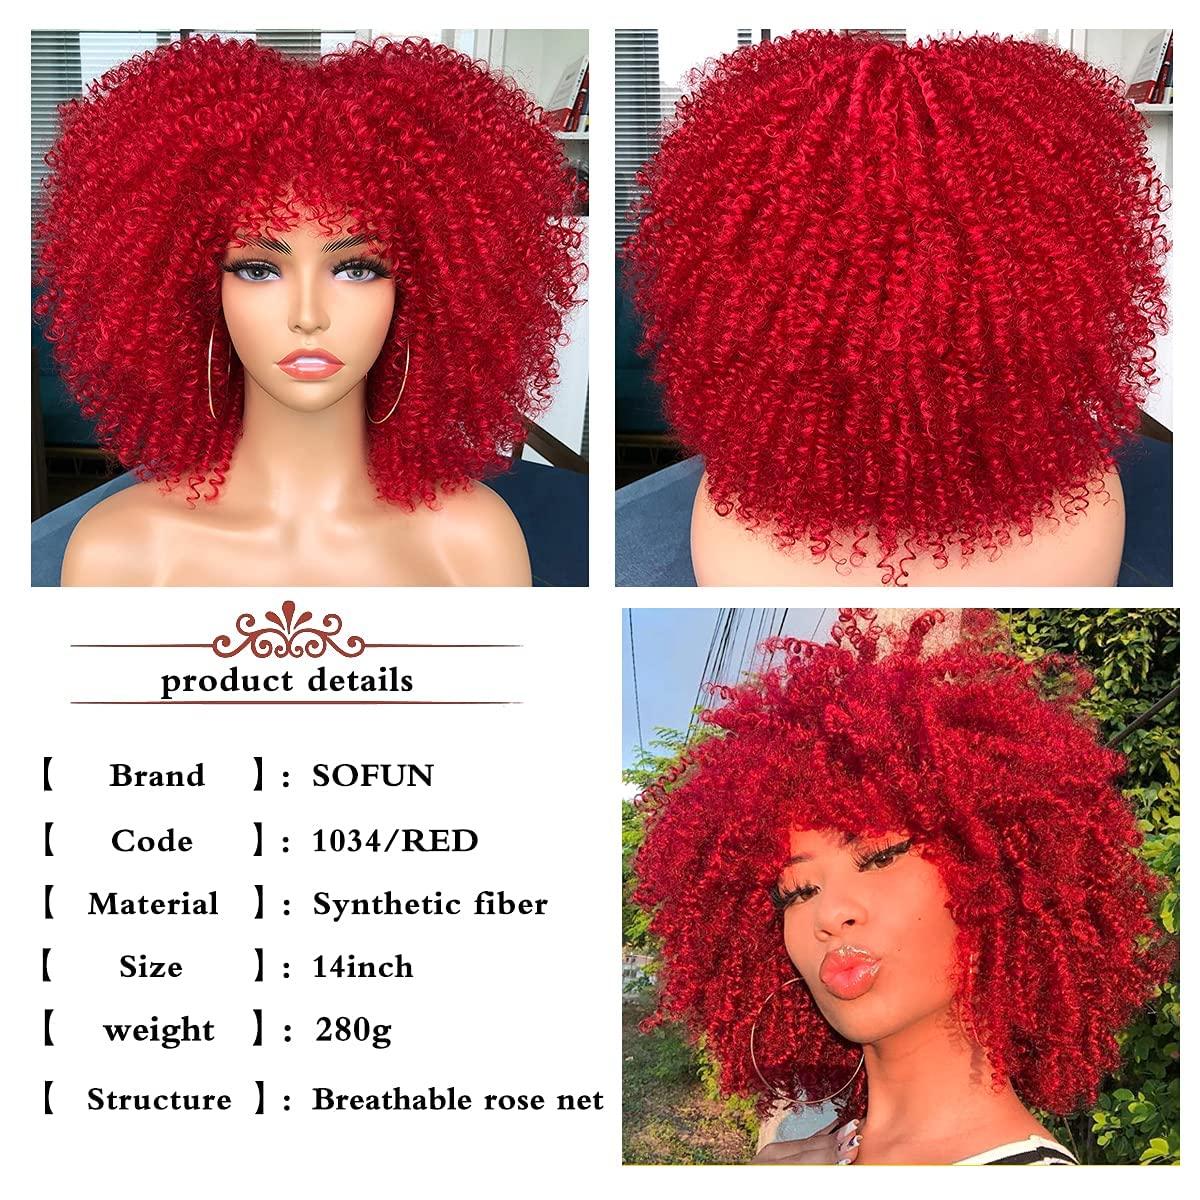 Sofun Short Curly Afro Wigs With Bangs For Black Women Short Kinky Curly Wig Synthetic Fiber